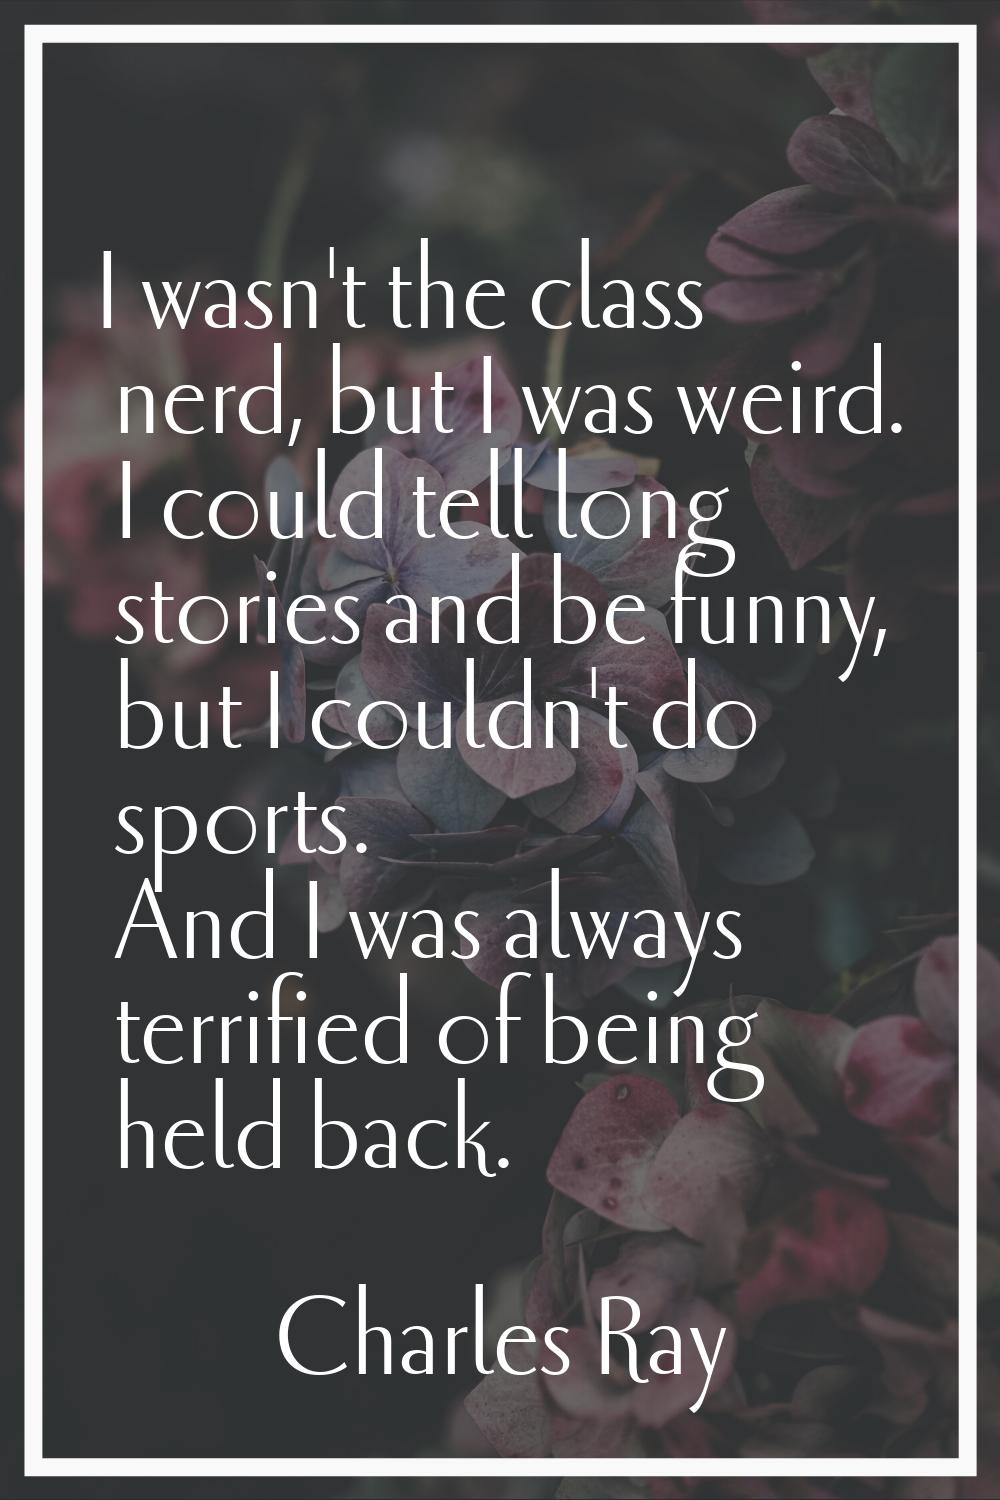 I wasn't the class nerd, but I was weird. I could tell long stories and be funny, but I couldn't do